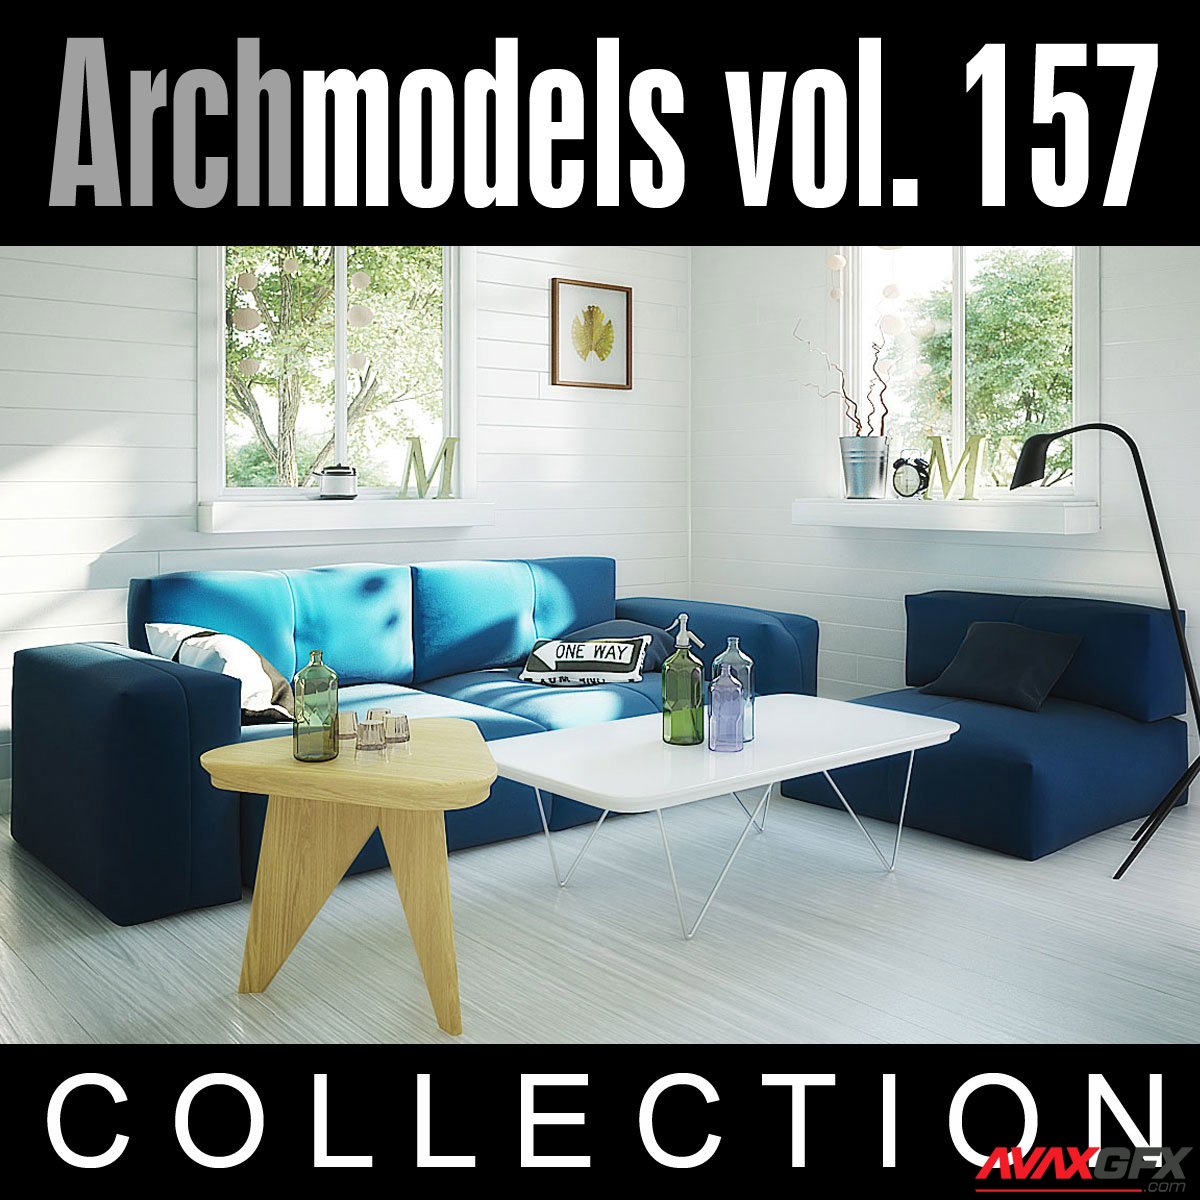 Evermotion Archmodels Vol. 157